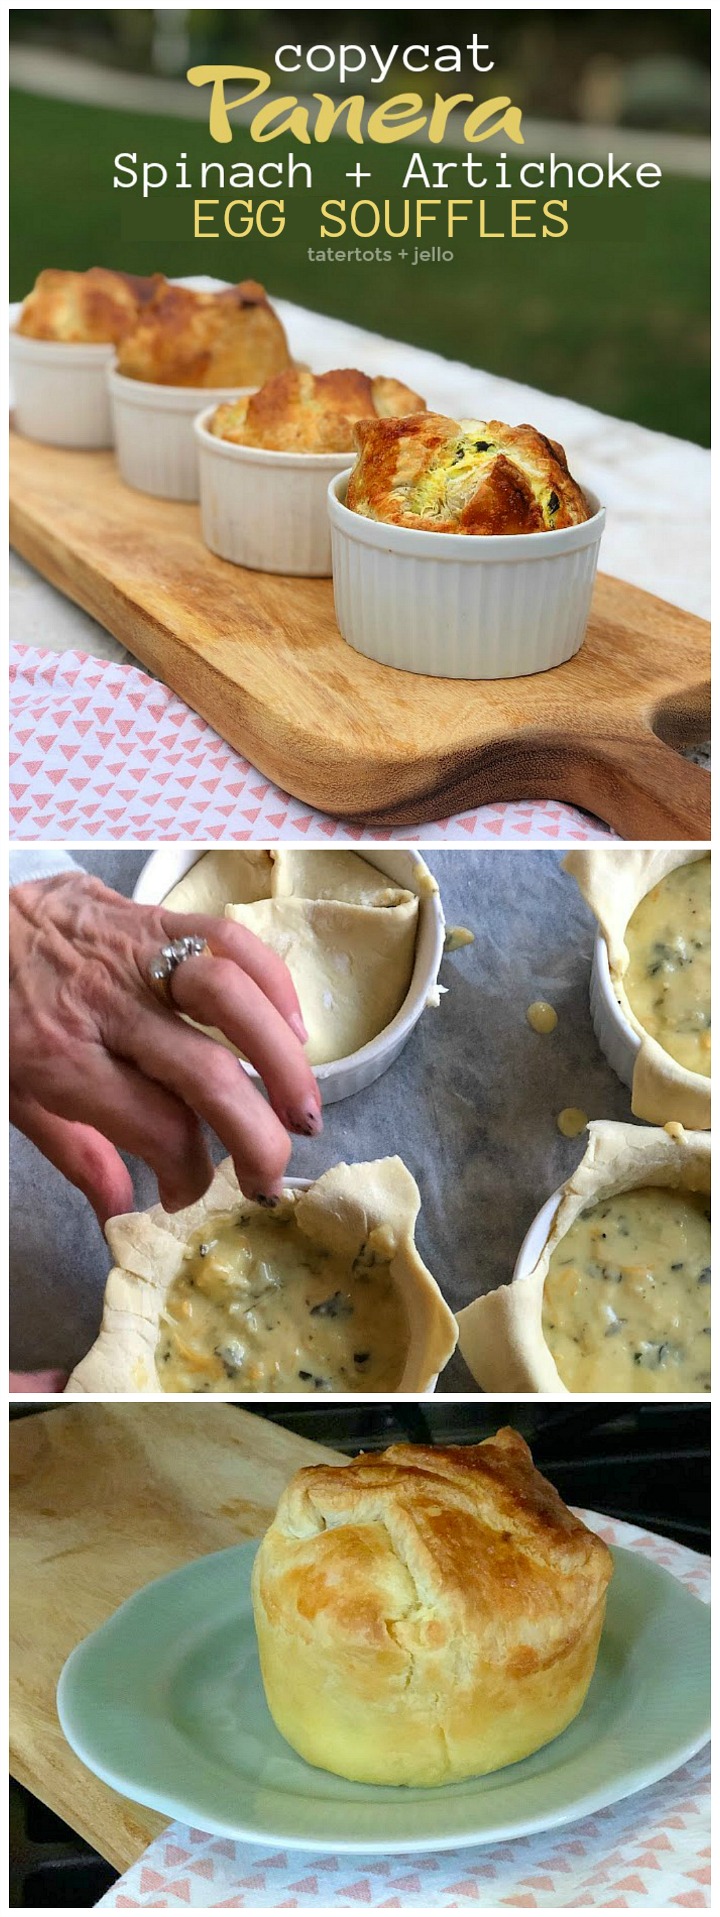 Copycat Panera Spinach and Artichoke Egg Soufflés. Fluffy eggs in a delicious spinach artichoke batter baked in layers of light flakey crust will impress weekend guests and the best part is they are SO easy to make! 